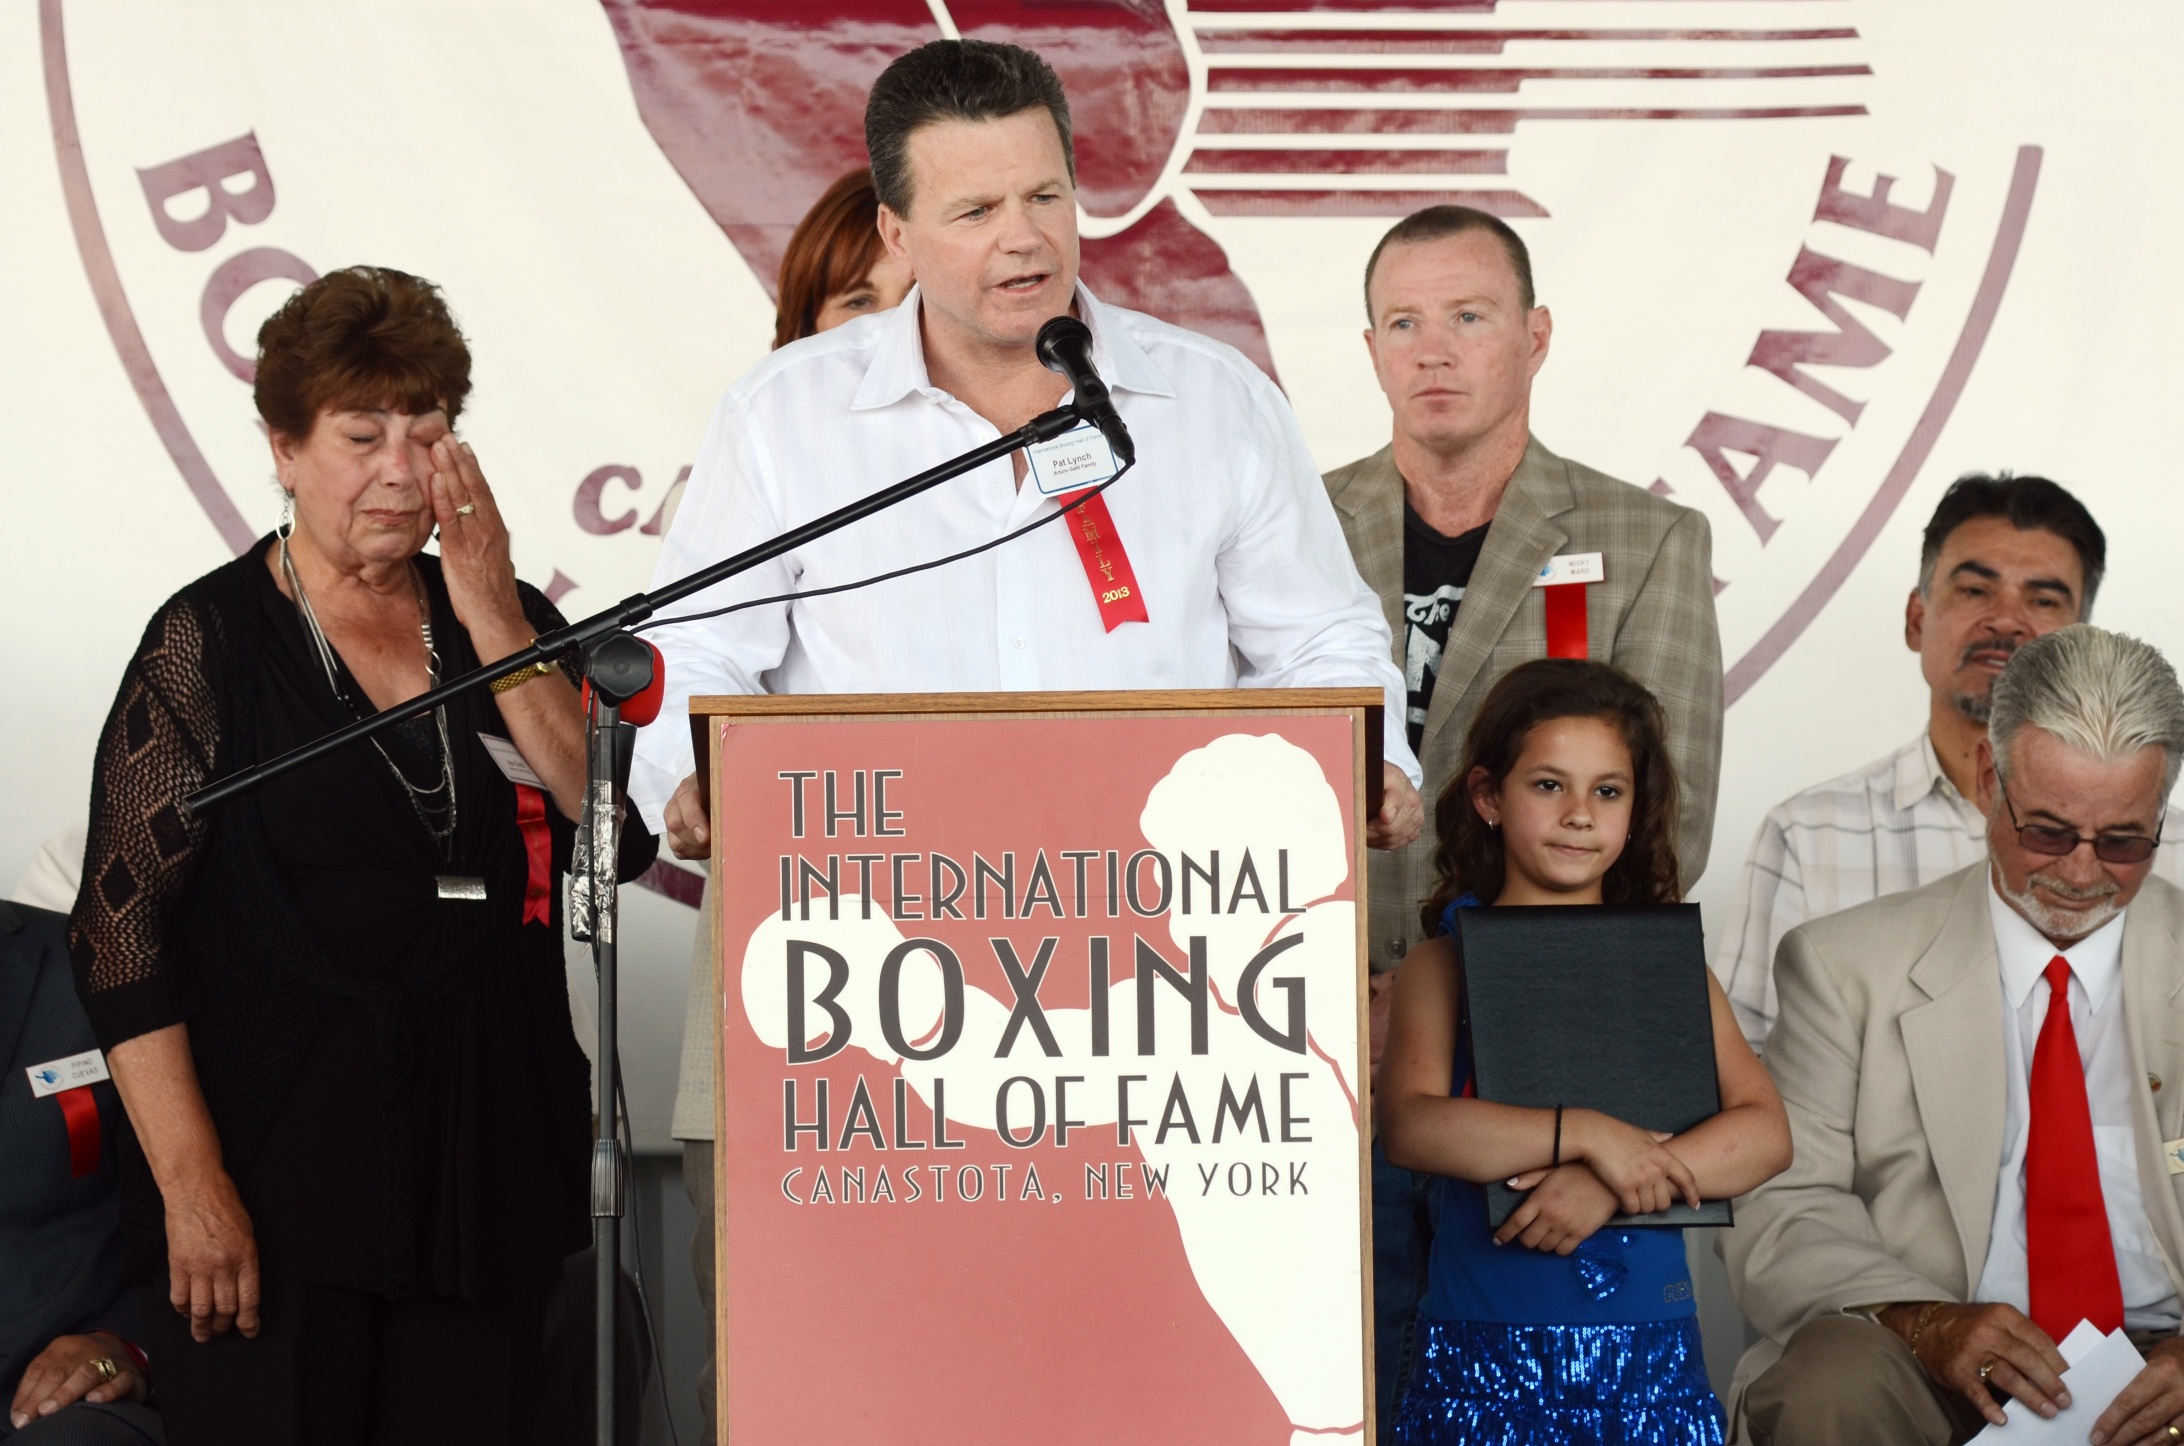 Pat Lynch, former manager of the late Arturo Gatti, gives an acceptance speech on behalf of Gatti, who was inducted into the International Boxing Hall of Fame in Canastota, New York. Photo: AP